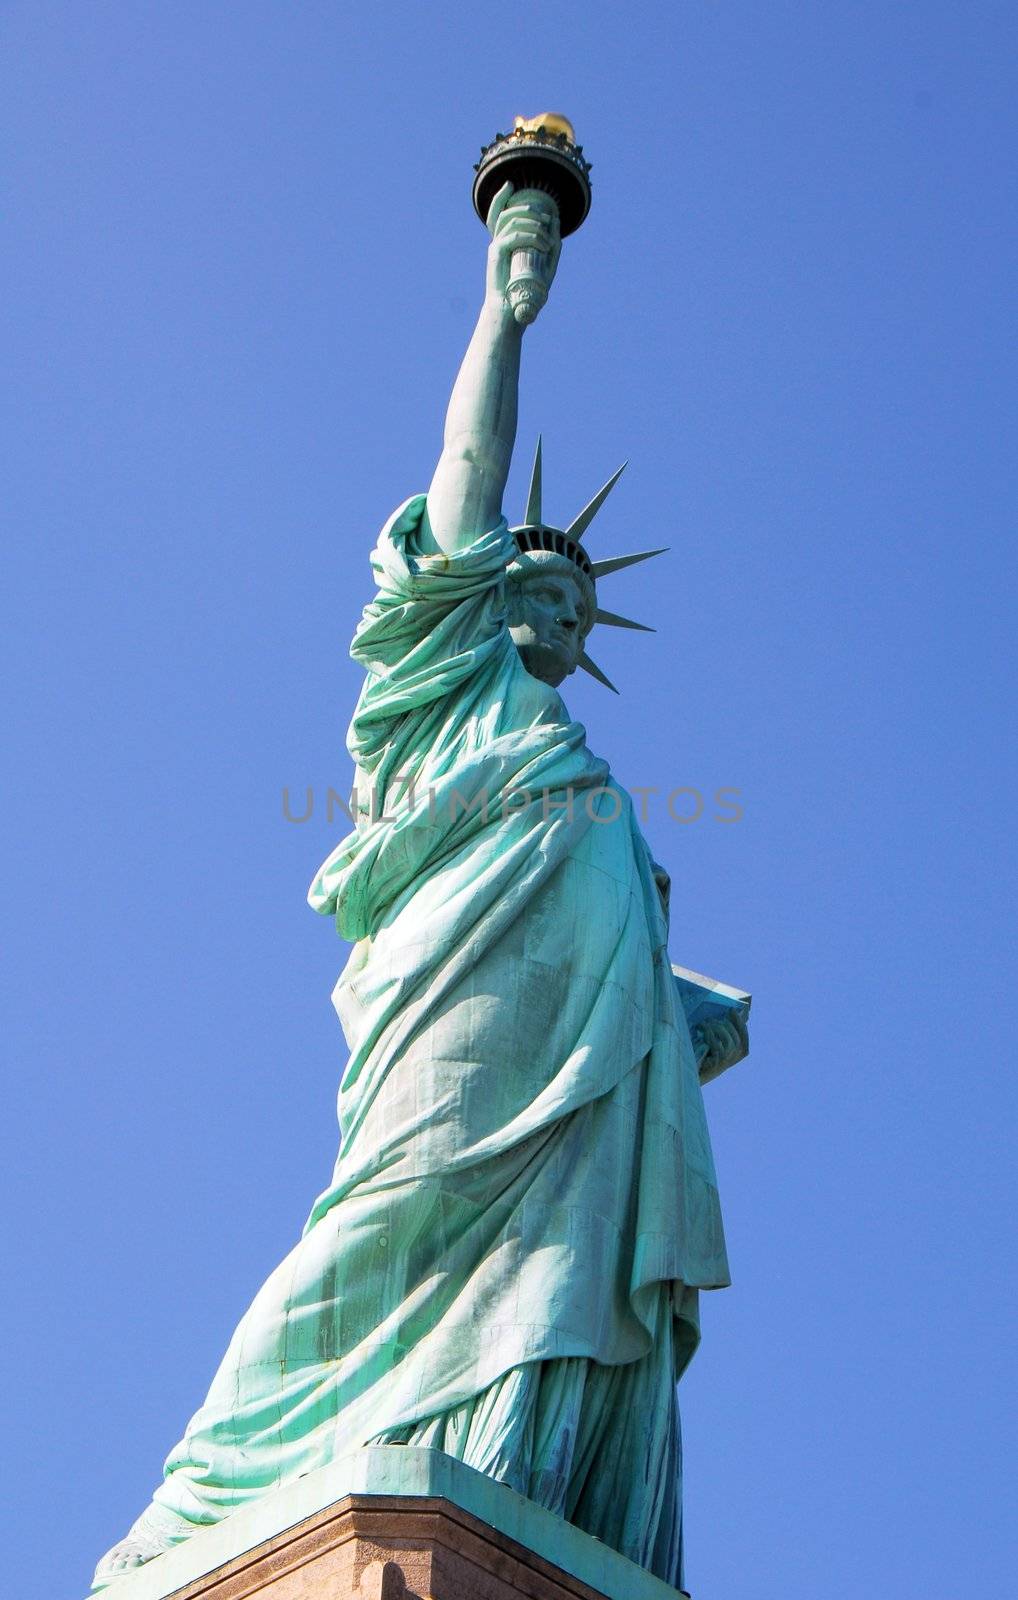 Statue of Liberty a popular tourist attraction in in New York City USA